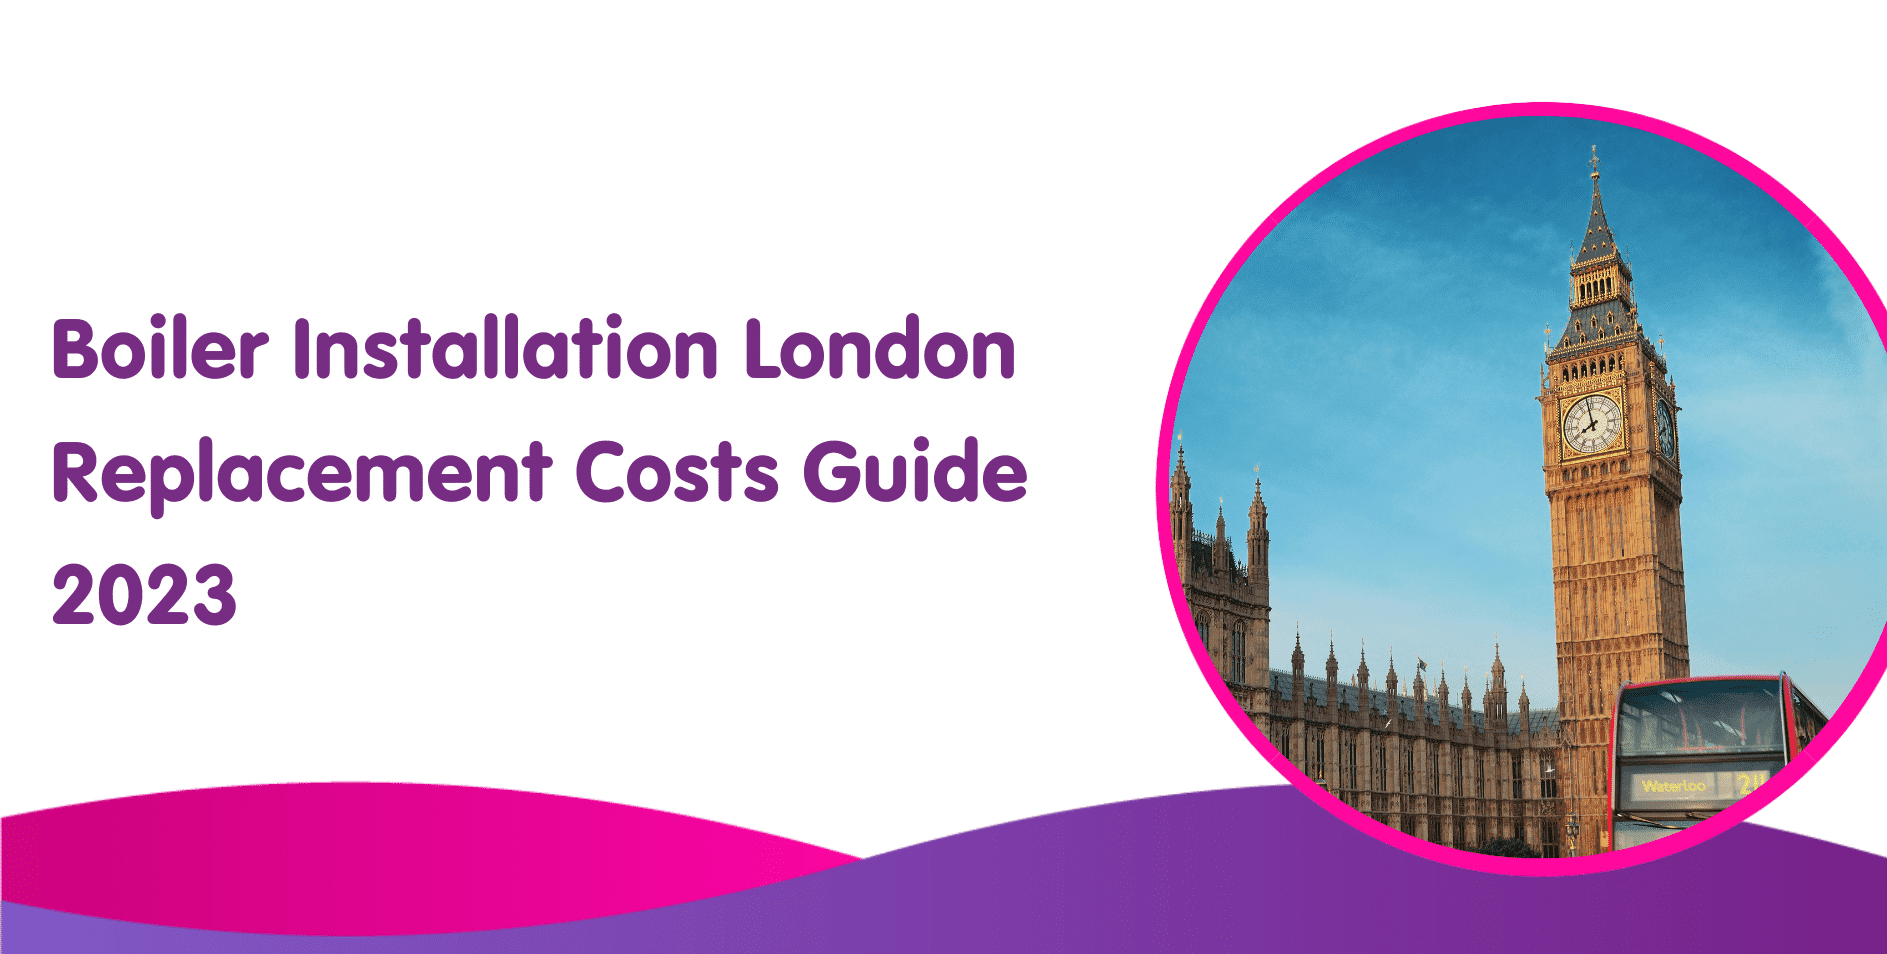 Boiler Installation London Replacement Costs Guide 2023